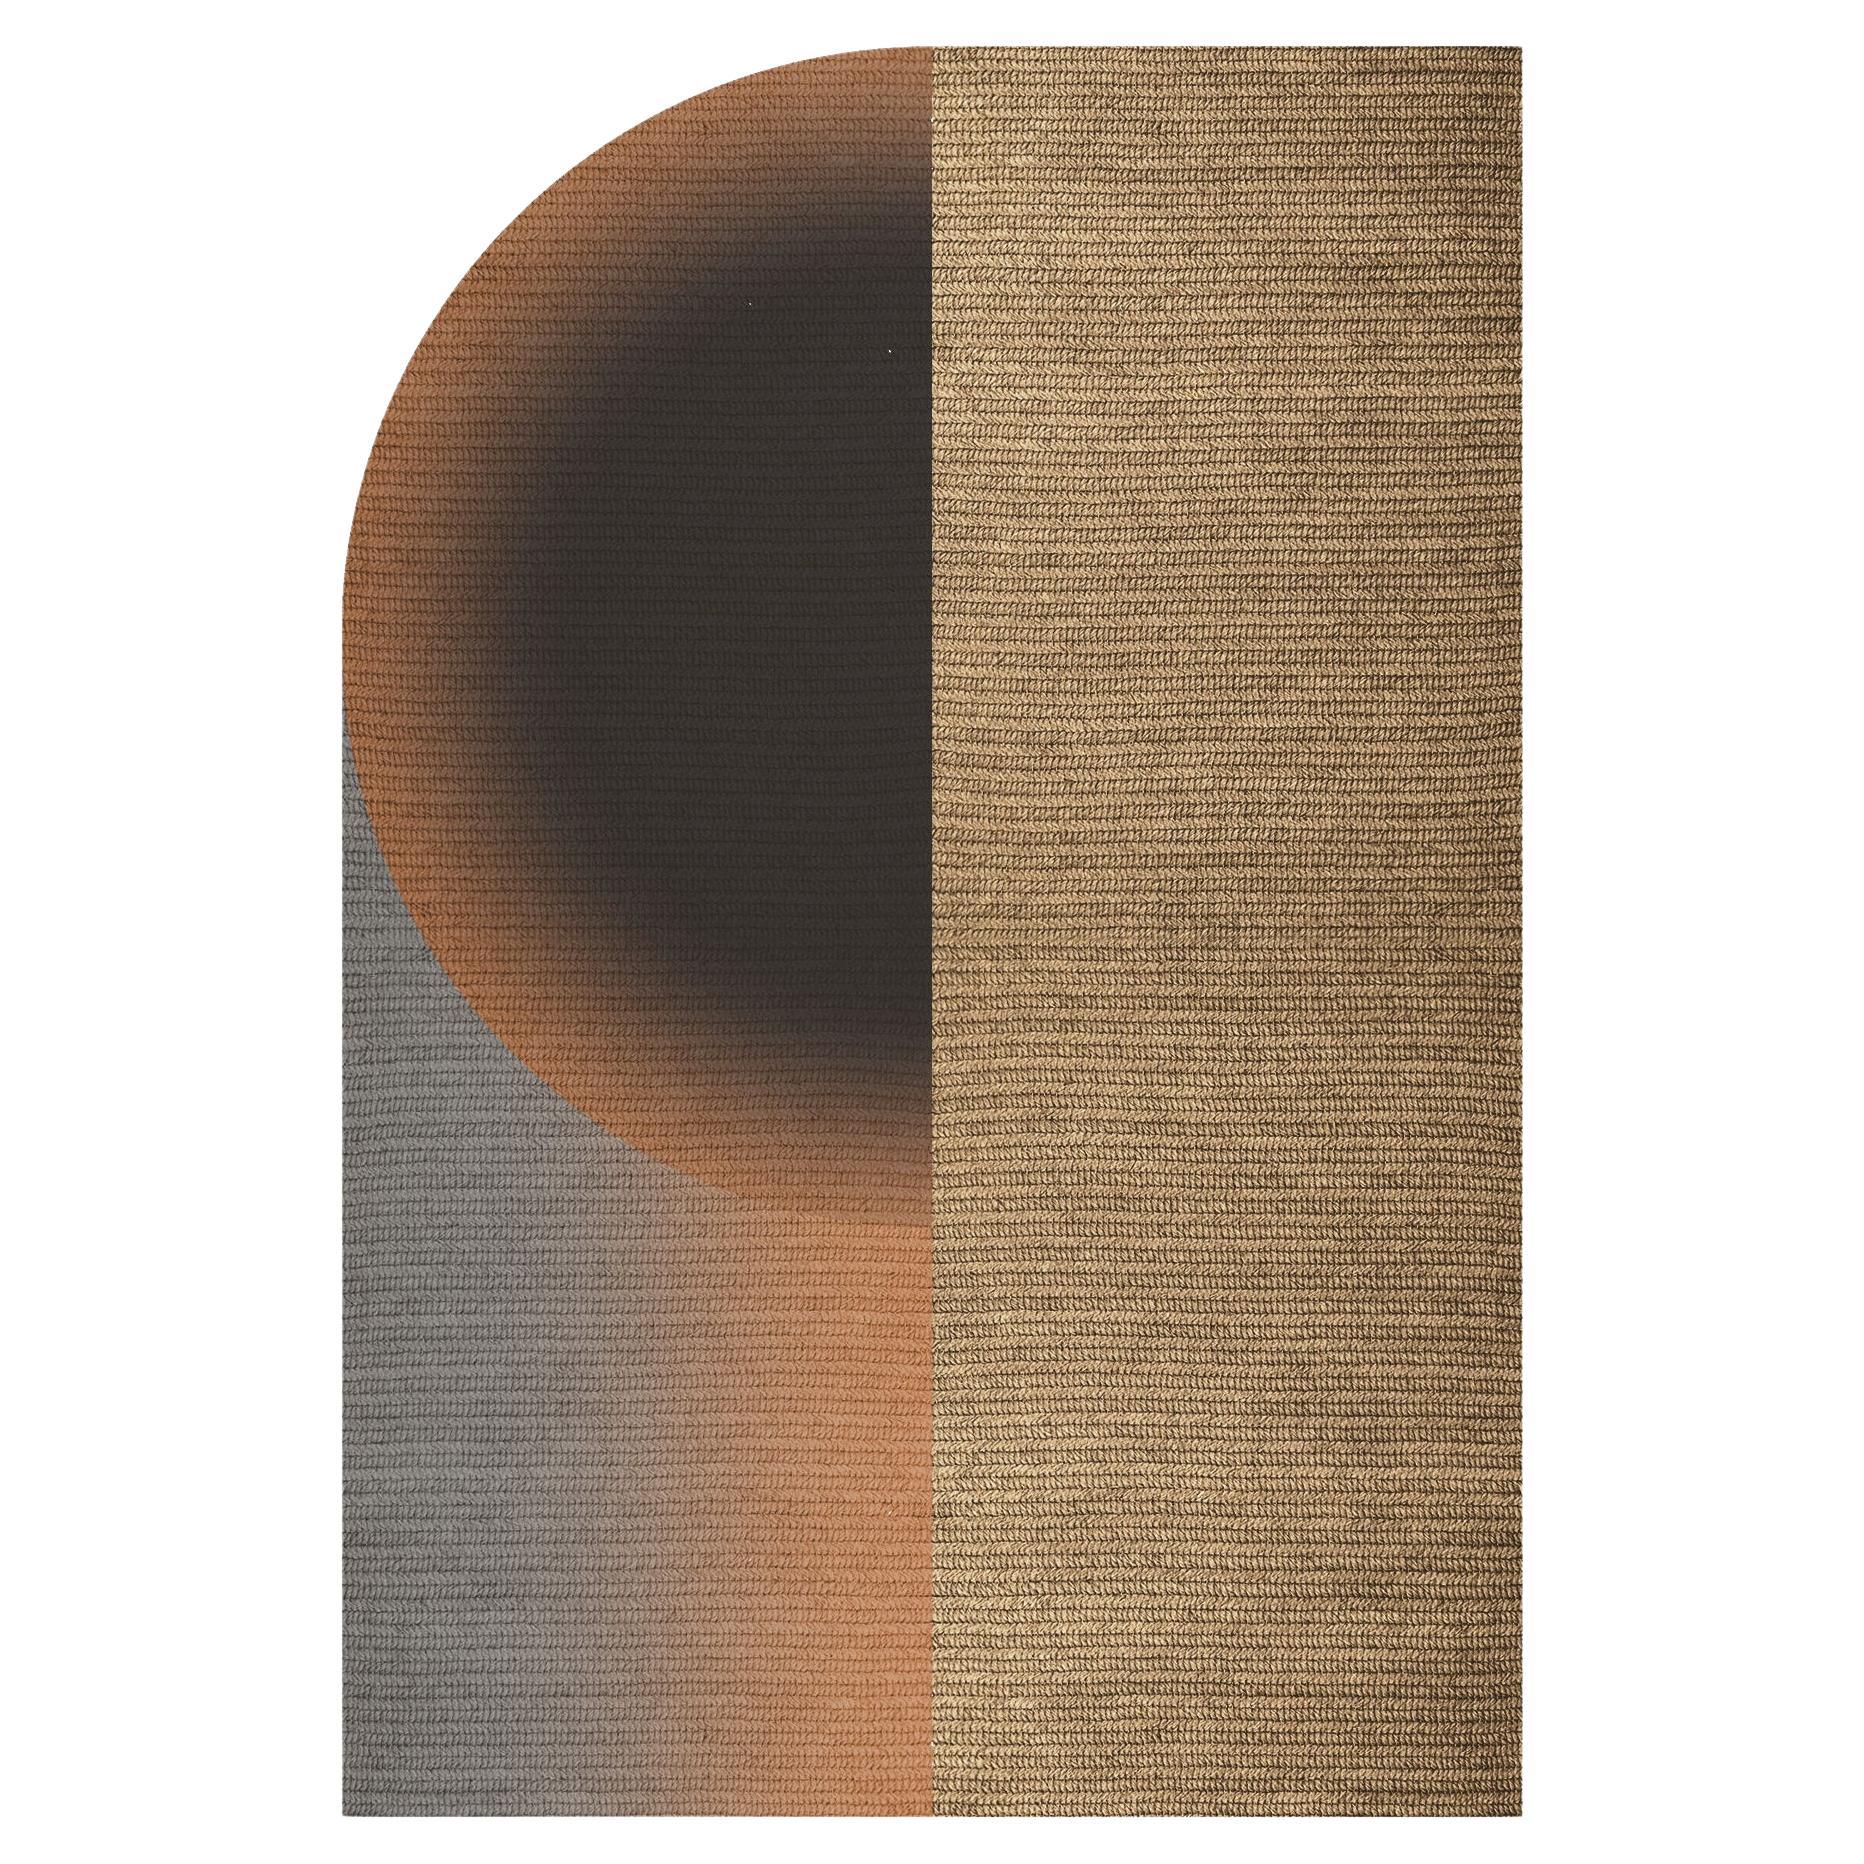 'Glow' Abaca Rug in Luxurious 'Mahogany' Shade, 160x240cm, by Claire Vos For Sale